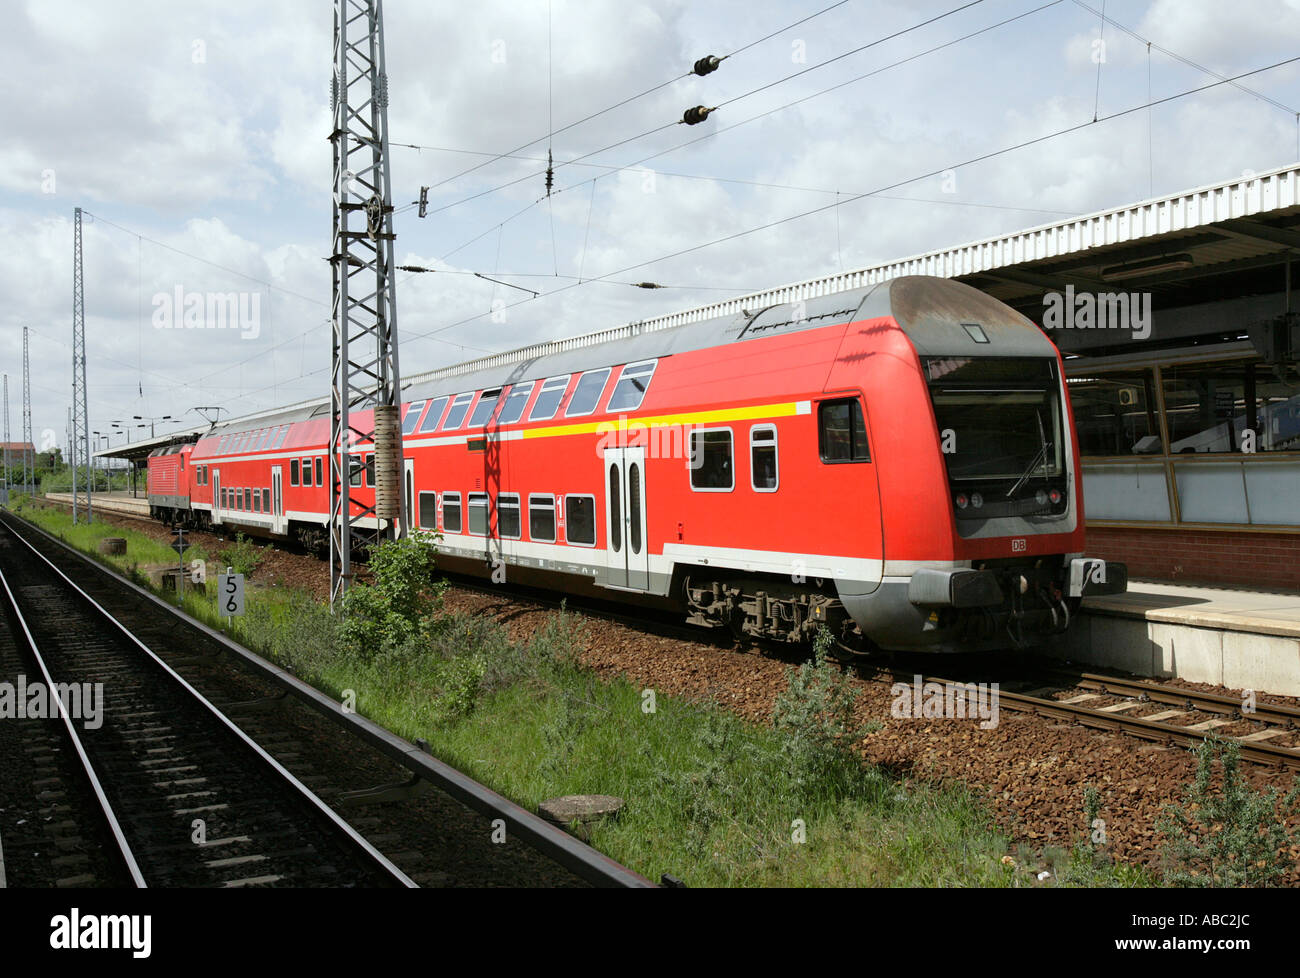 RE Express train at station airport Schönefeld in Berlin Stock Photo - Alamy